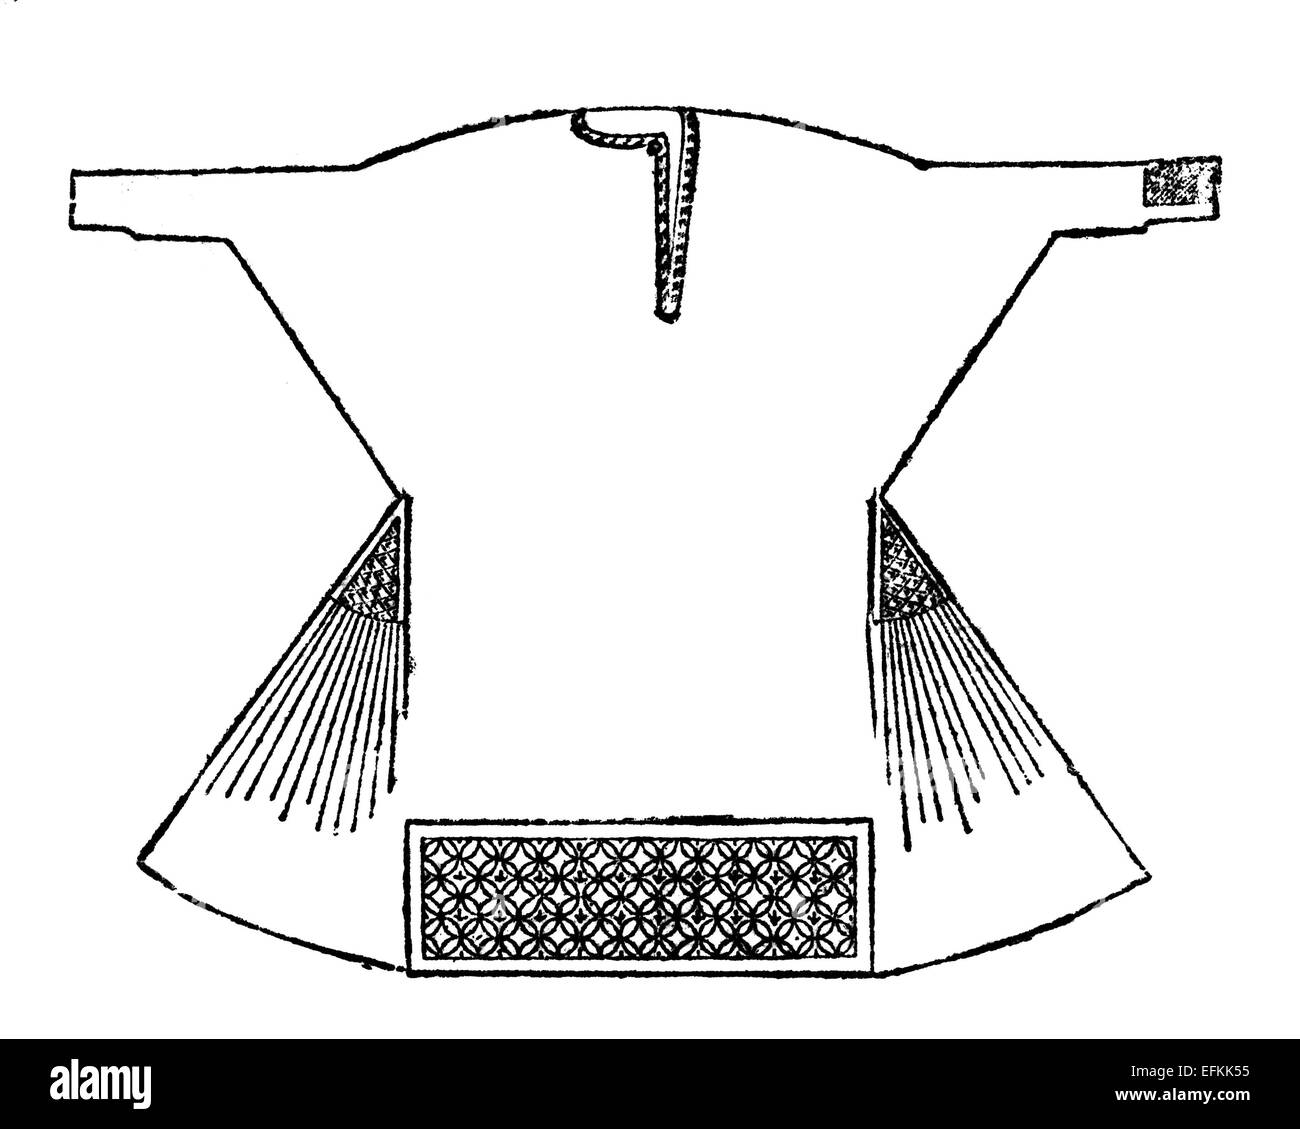 Victorian engraving of an alb robe. Digitally restored image from a mid-19th century Encyclopaedia. Stock Photo